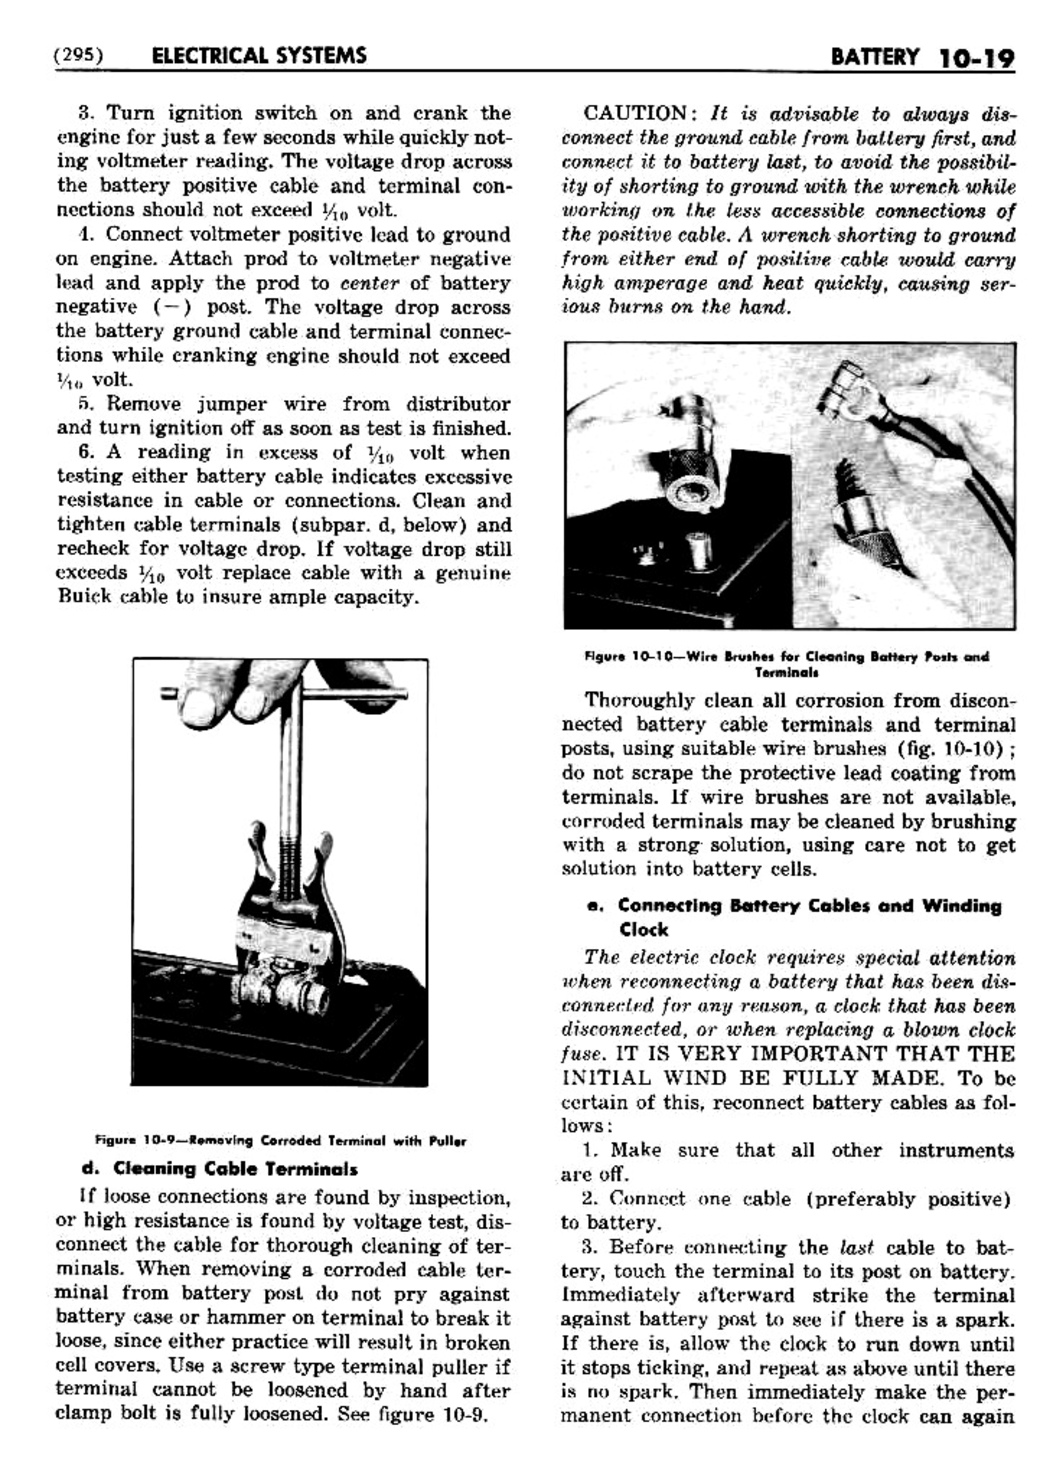 n_11 1948 Buick Shop Manual - Electrical Systems-019-019.jpg